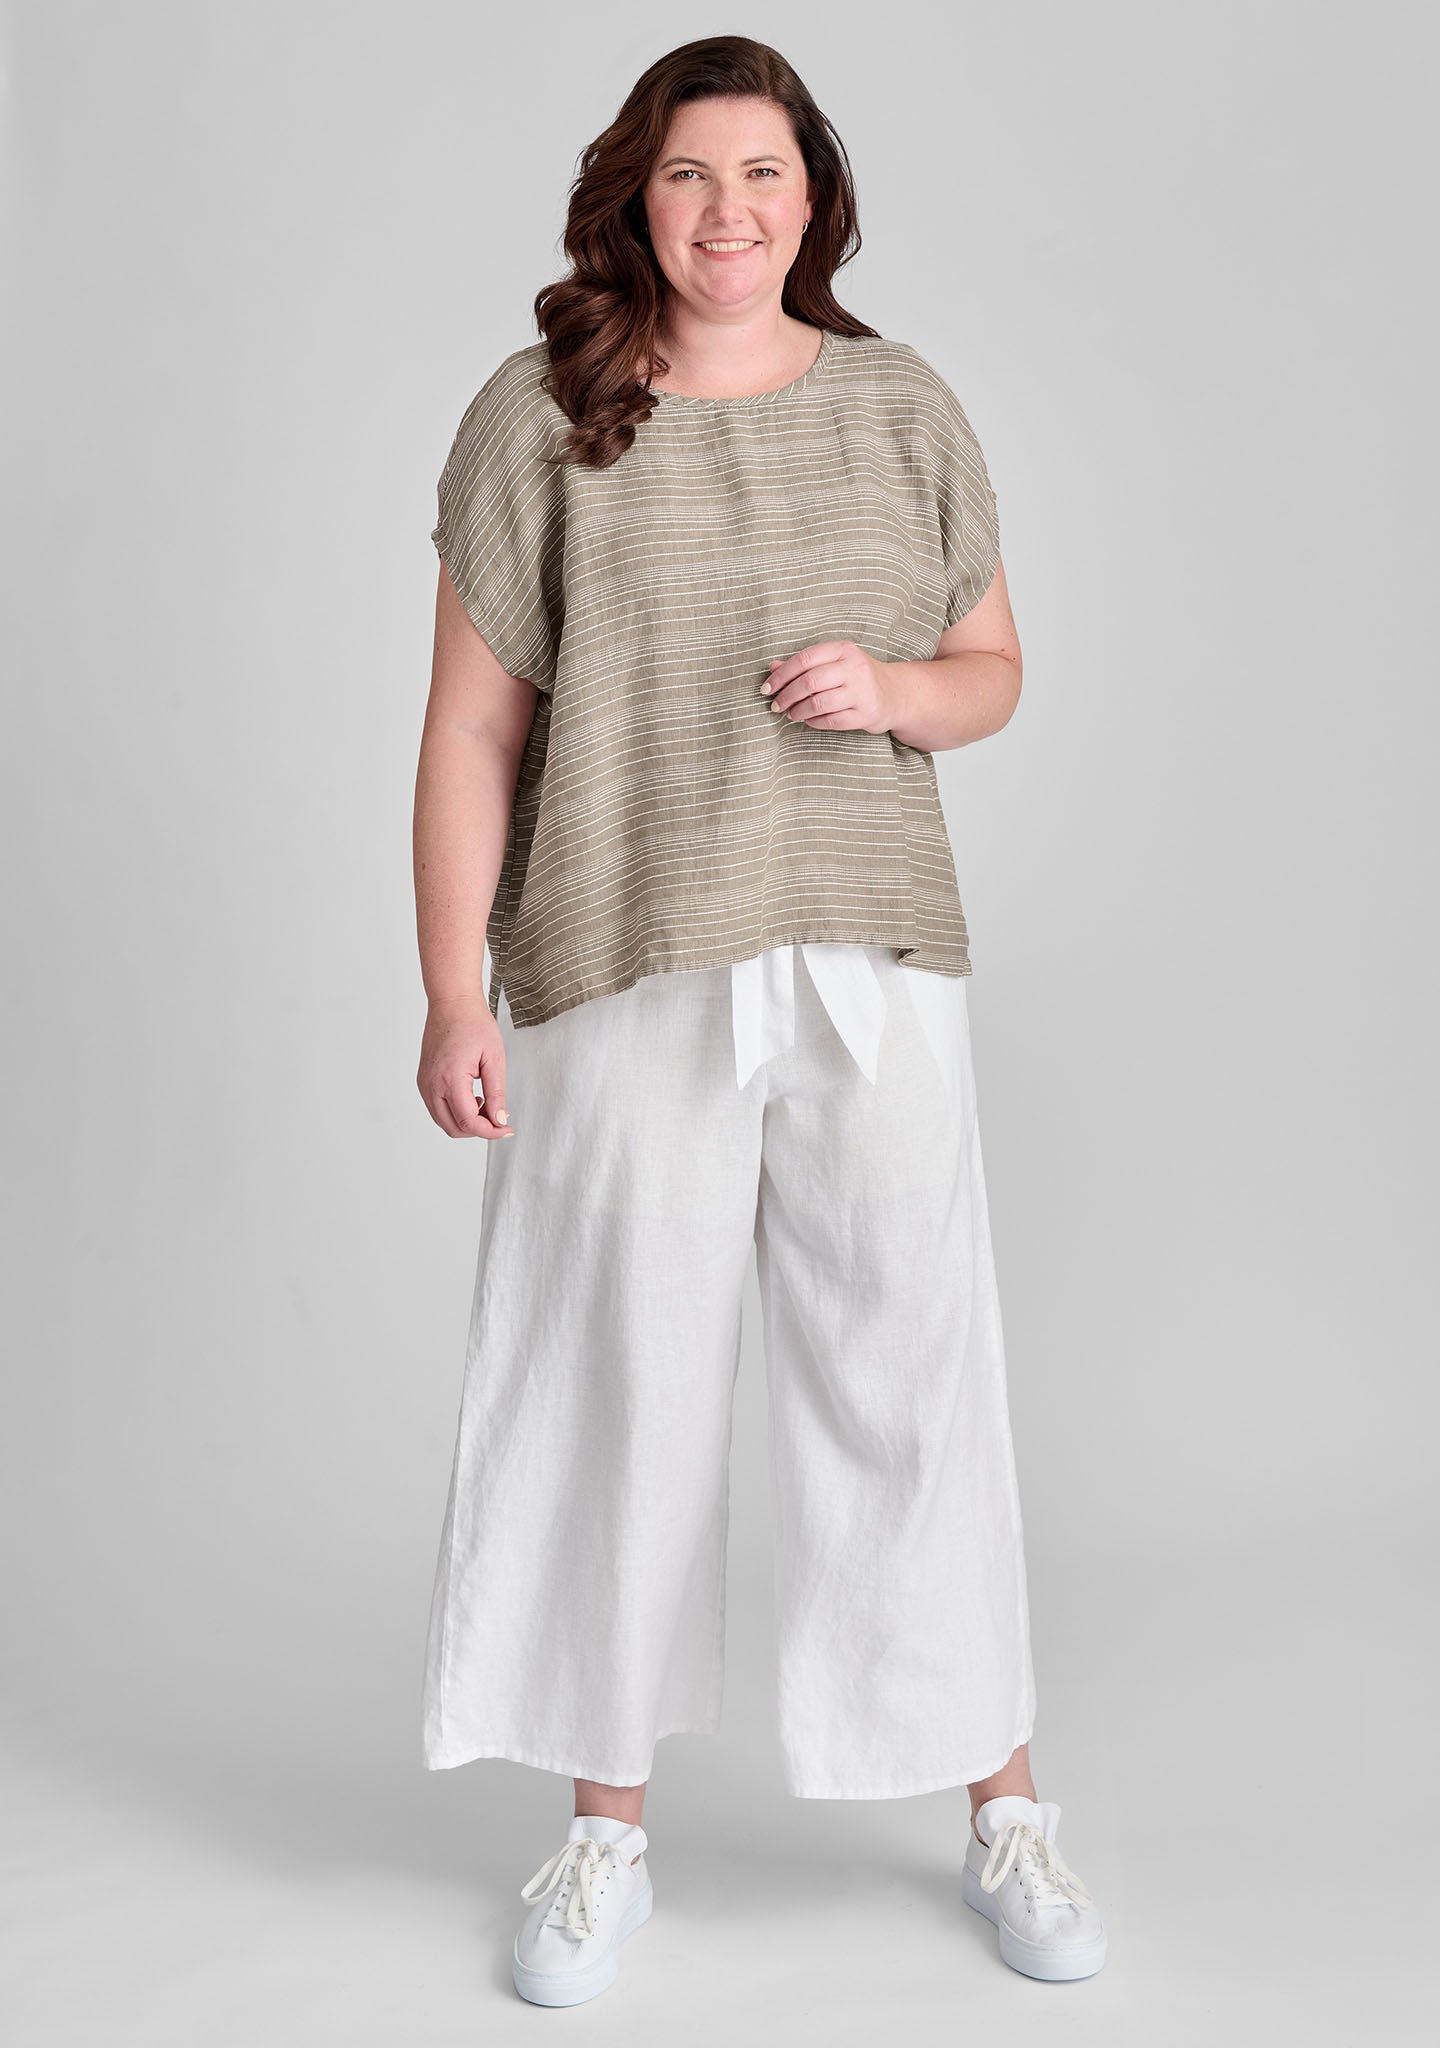 FLAX linen shirt in natural with linen pants in white